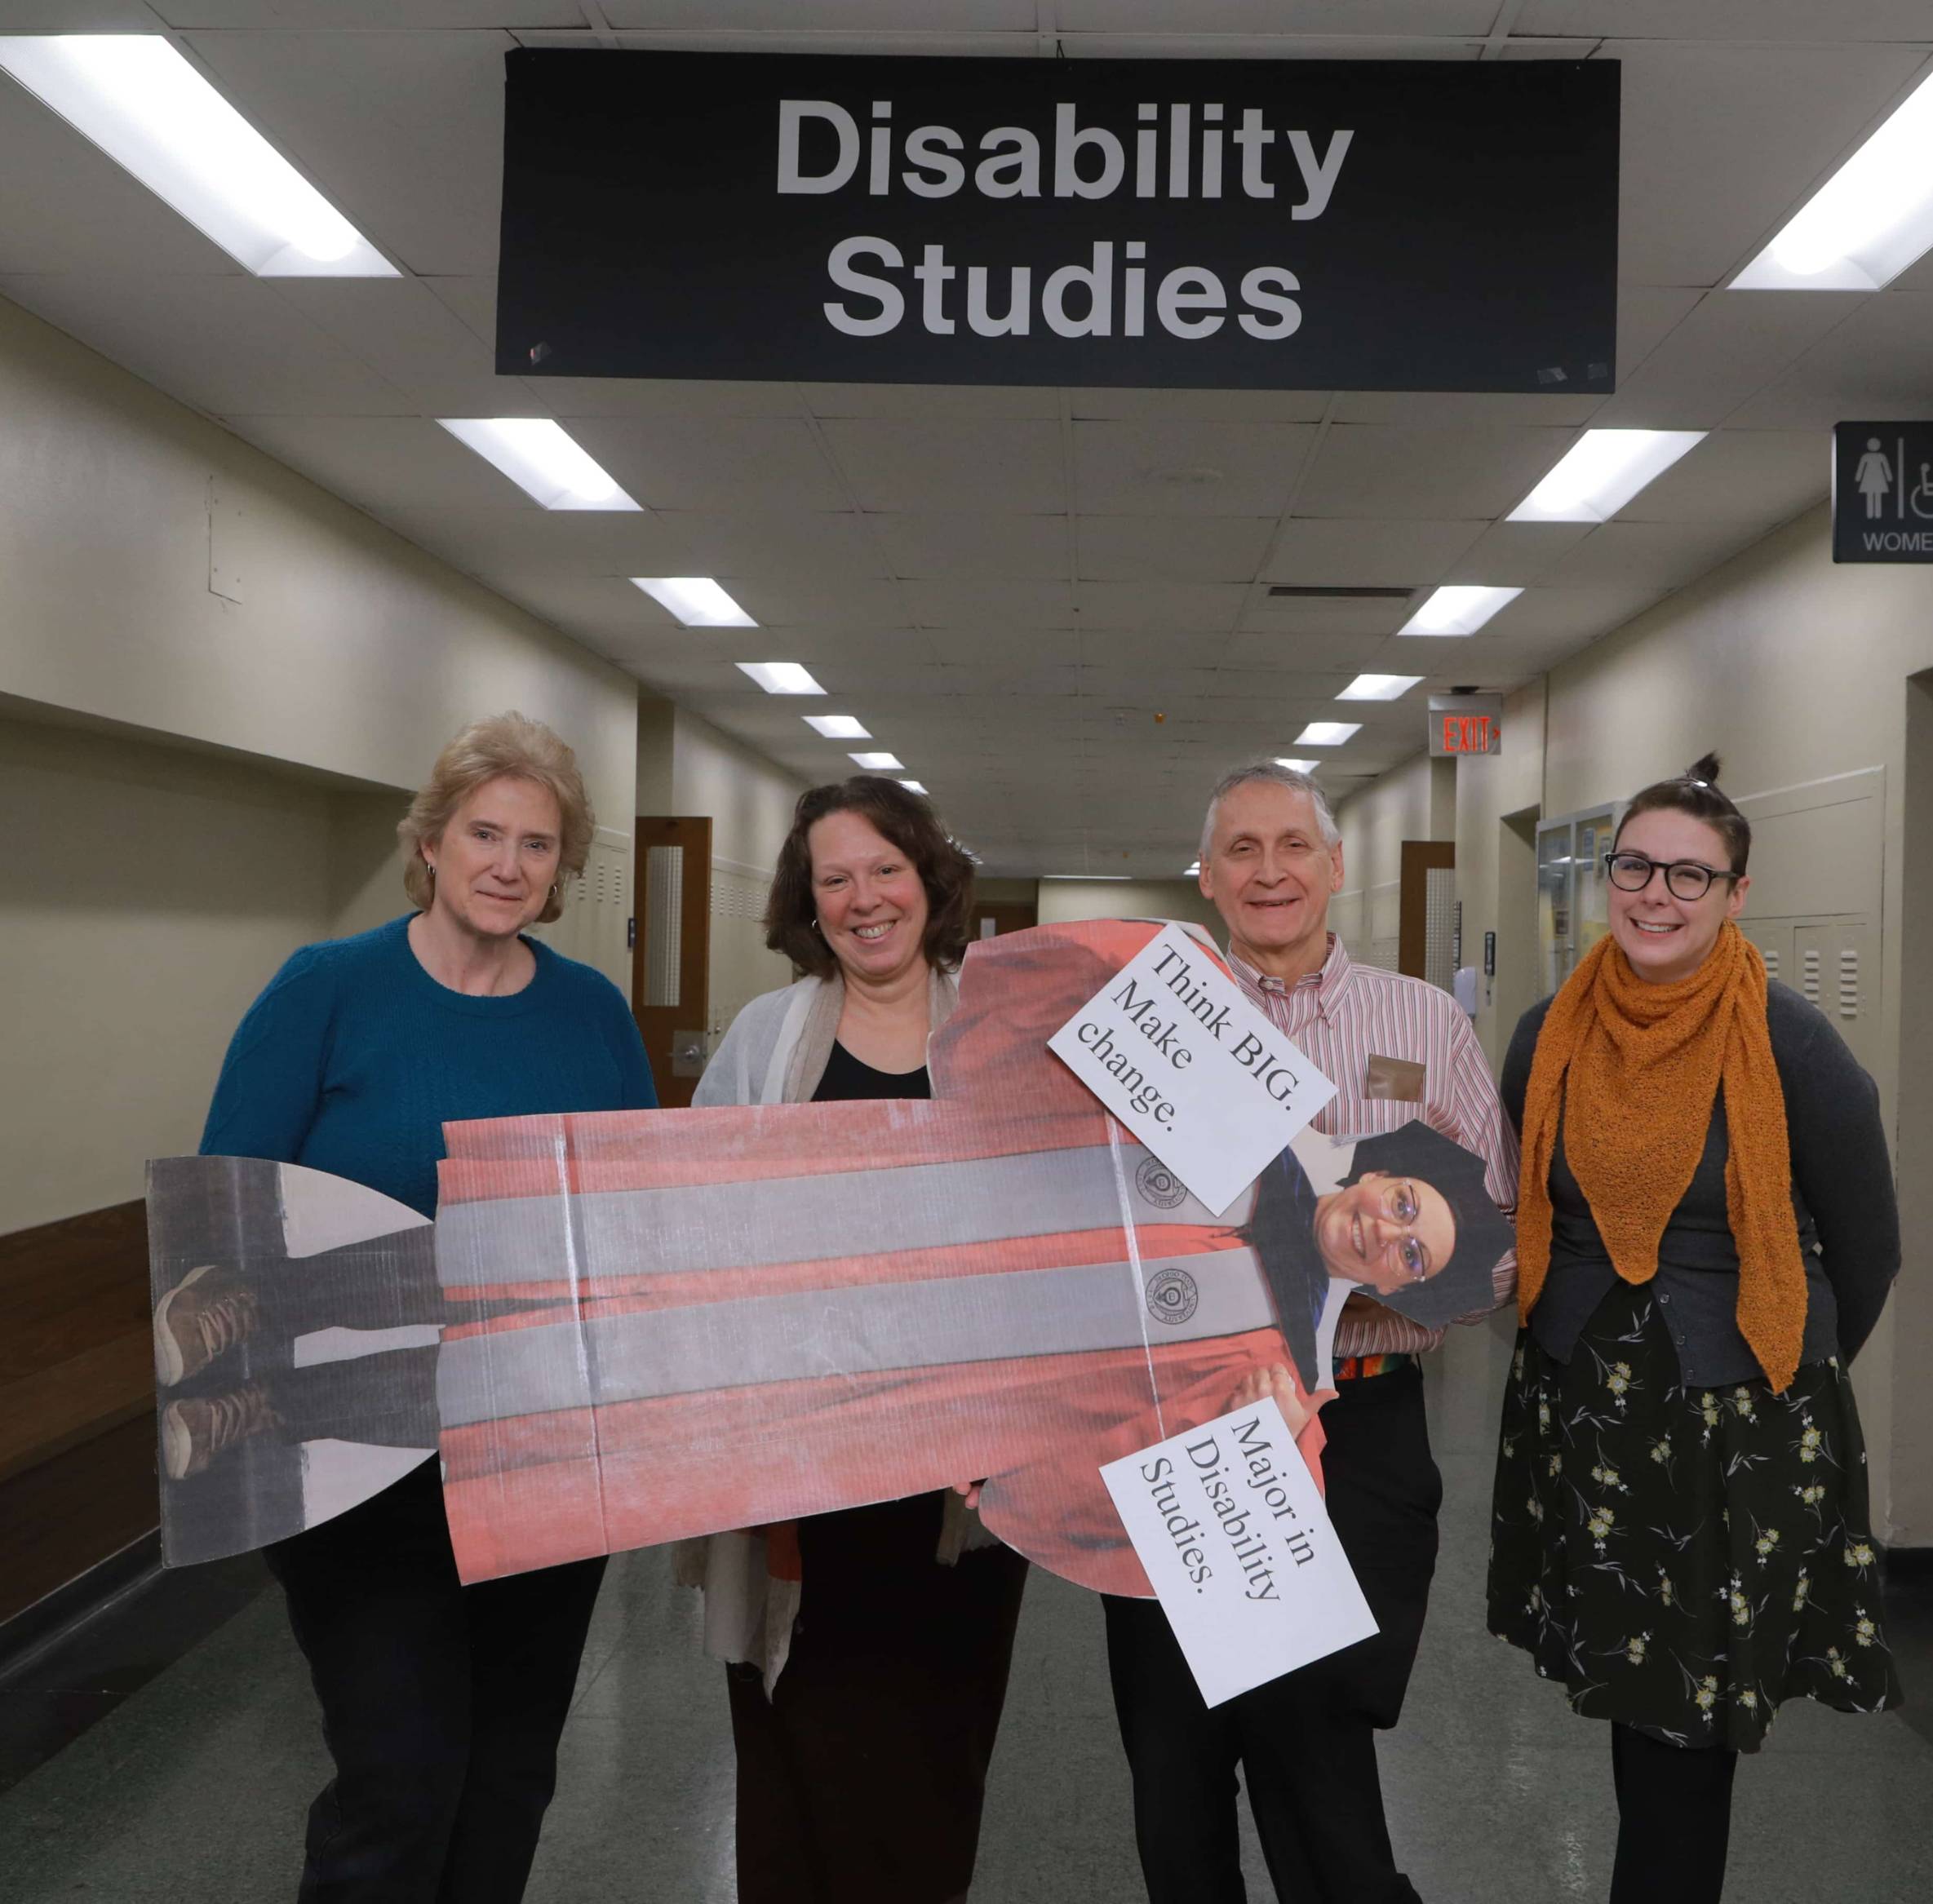 Linda Curtis and professors Kim Nielsen, Jim Ferris, and Becca Monteleone stand smiling under a sign that says Disability Studies while holding a cardboard cutout of professor Ally Day.